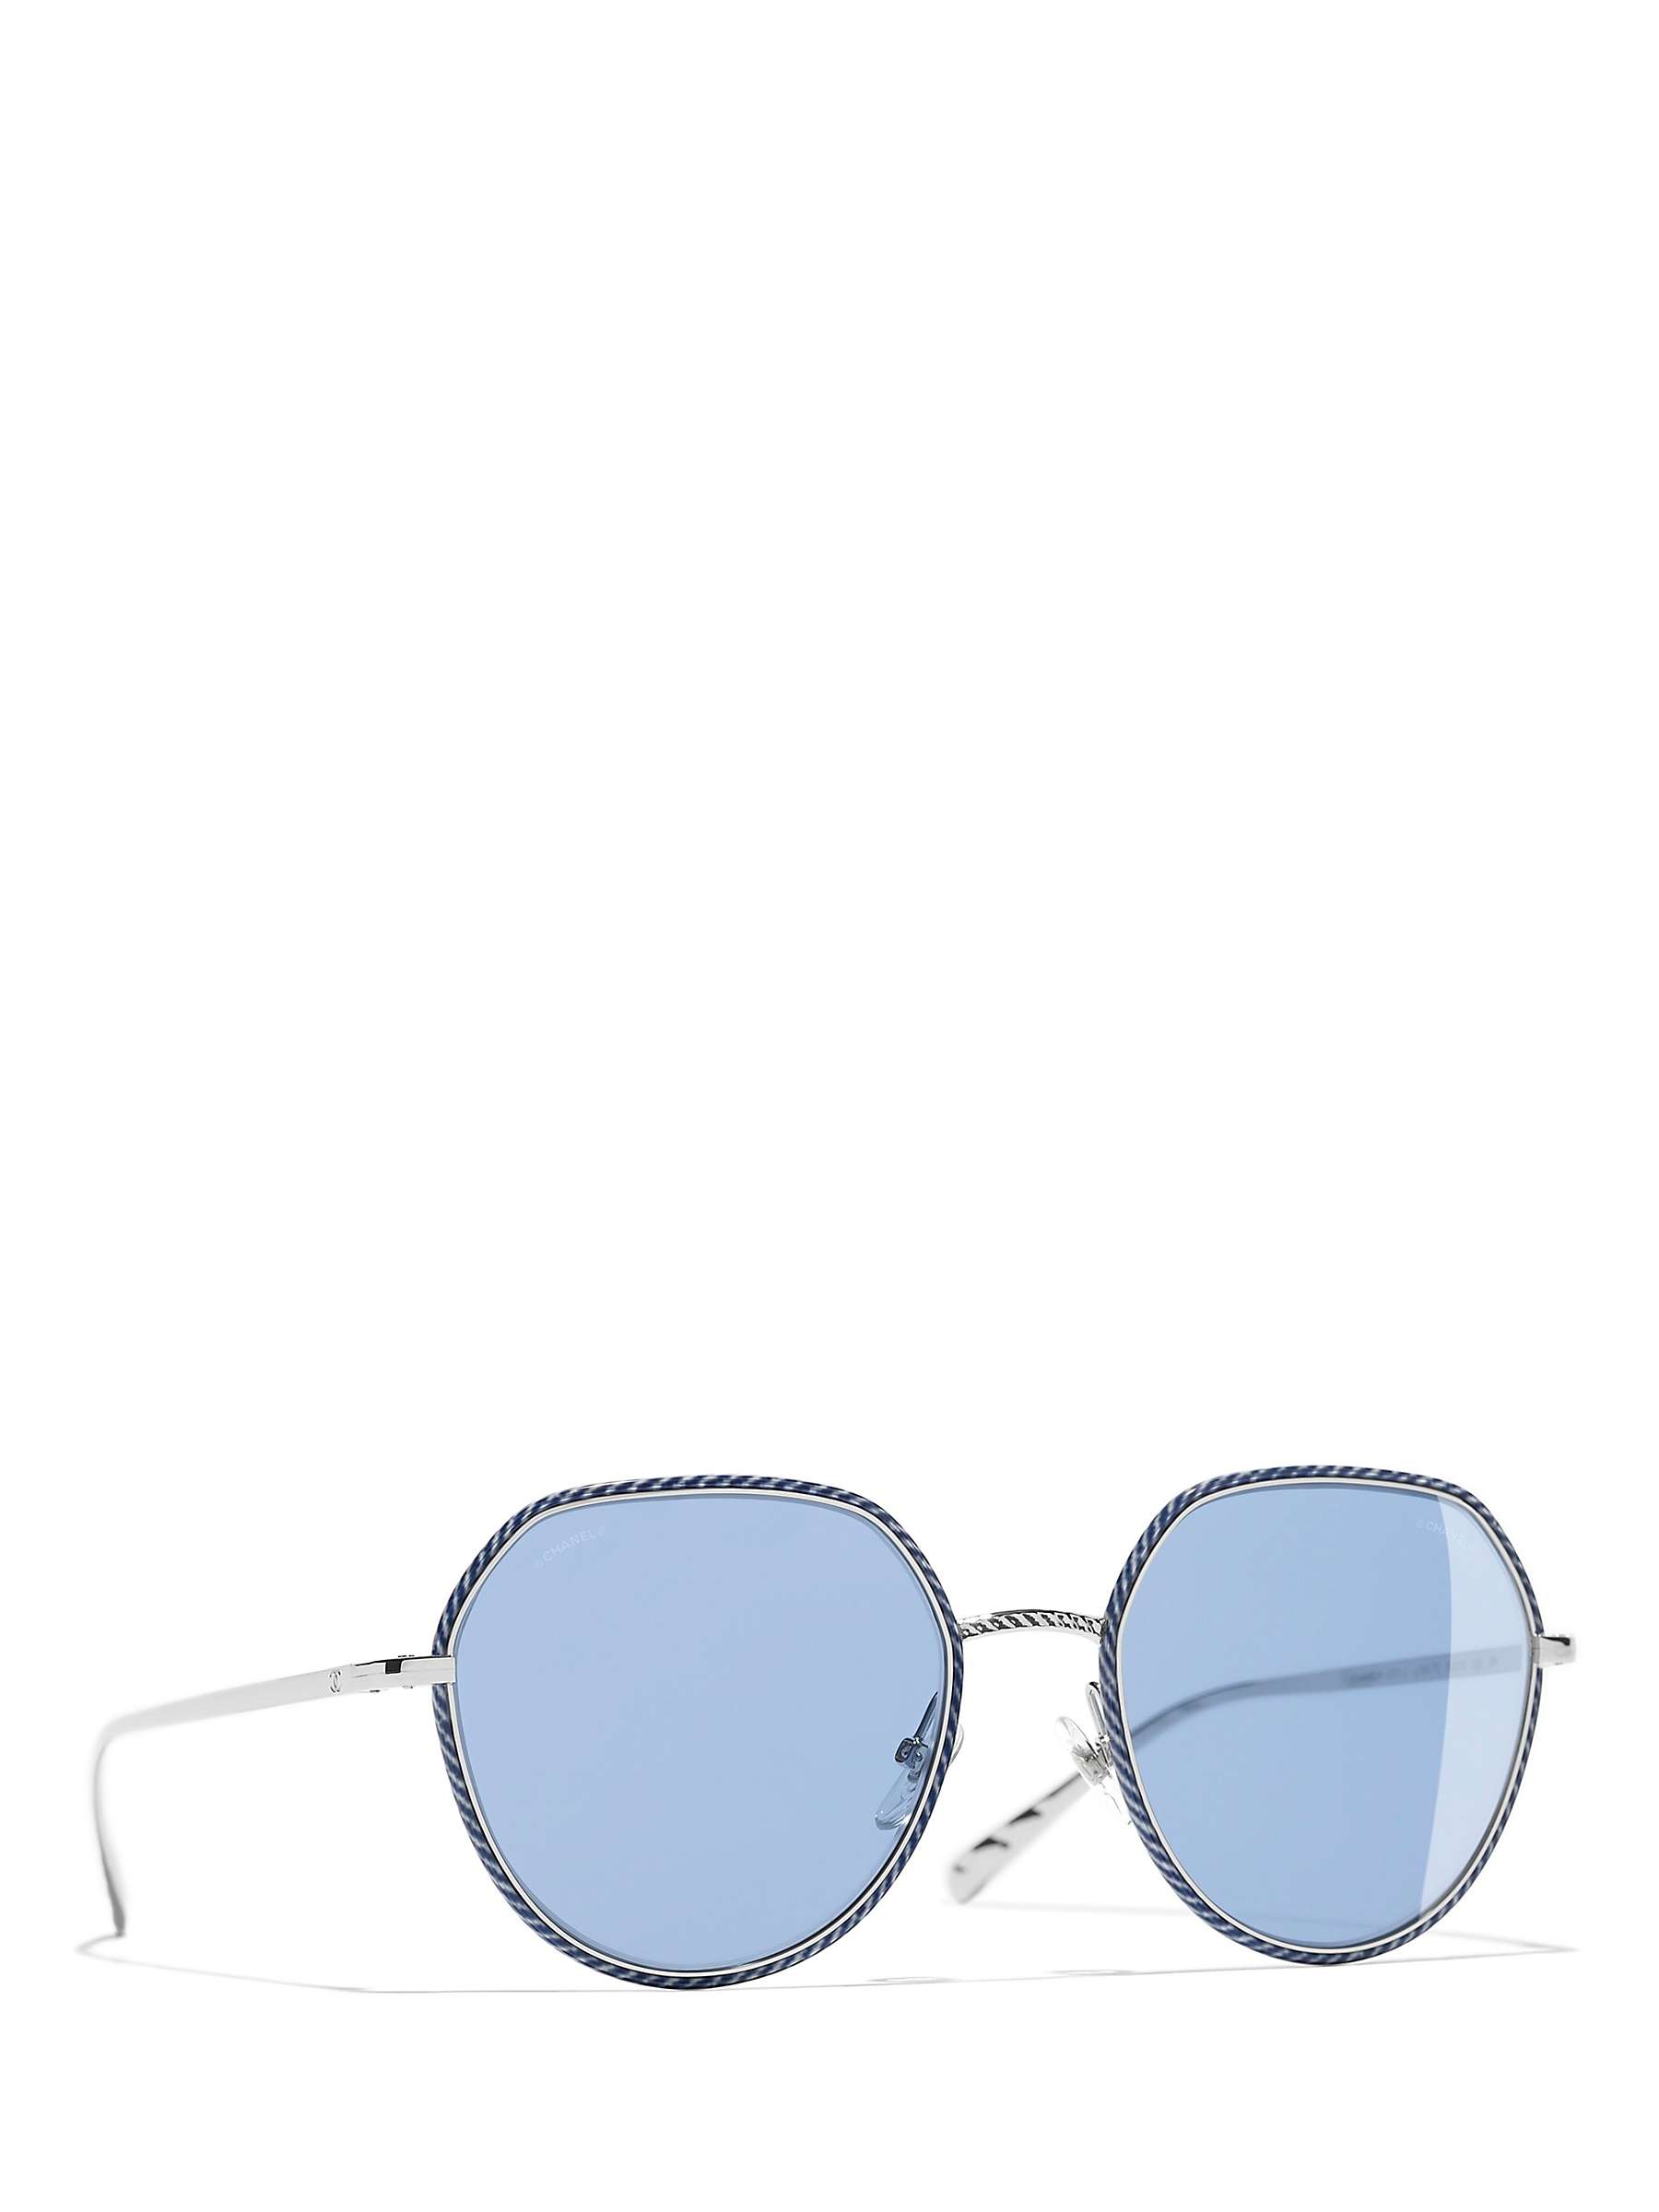 Buy CHANEL Round Sunglasses CH4251J Silver/Blue Online at johnlewis.com